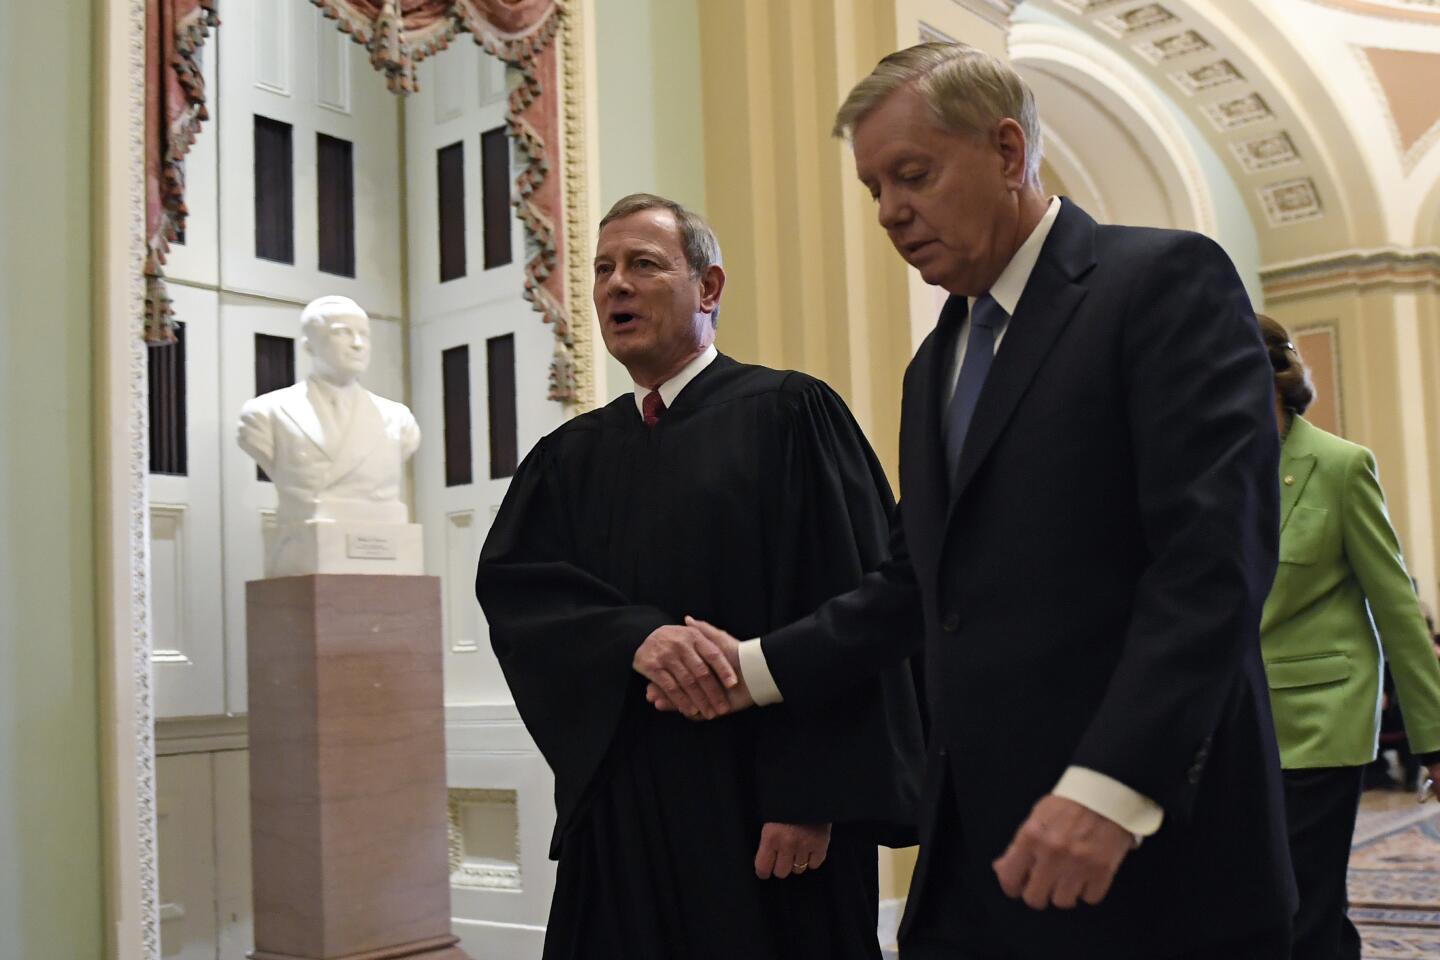 Sen. Lindsey Graham (R-S.C.) shakes hands with Supreme Court Chief Justice John G. Roberts Jr. as they leave Senate chambers.